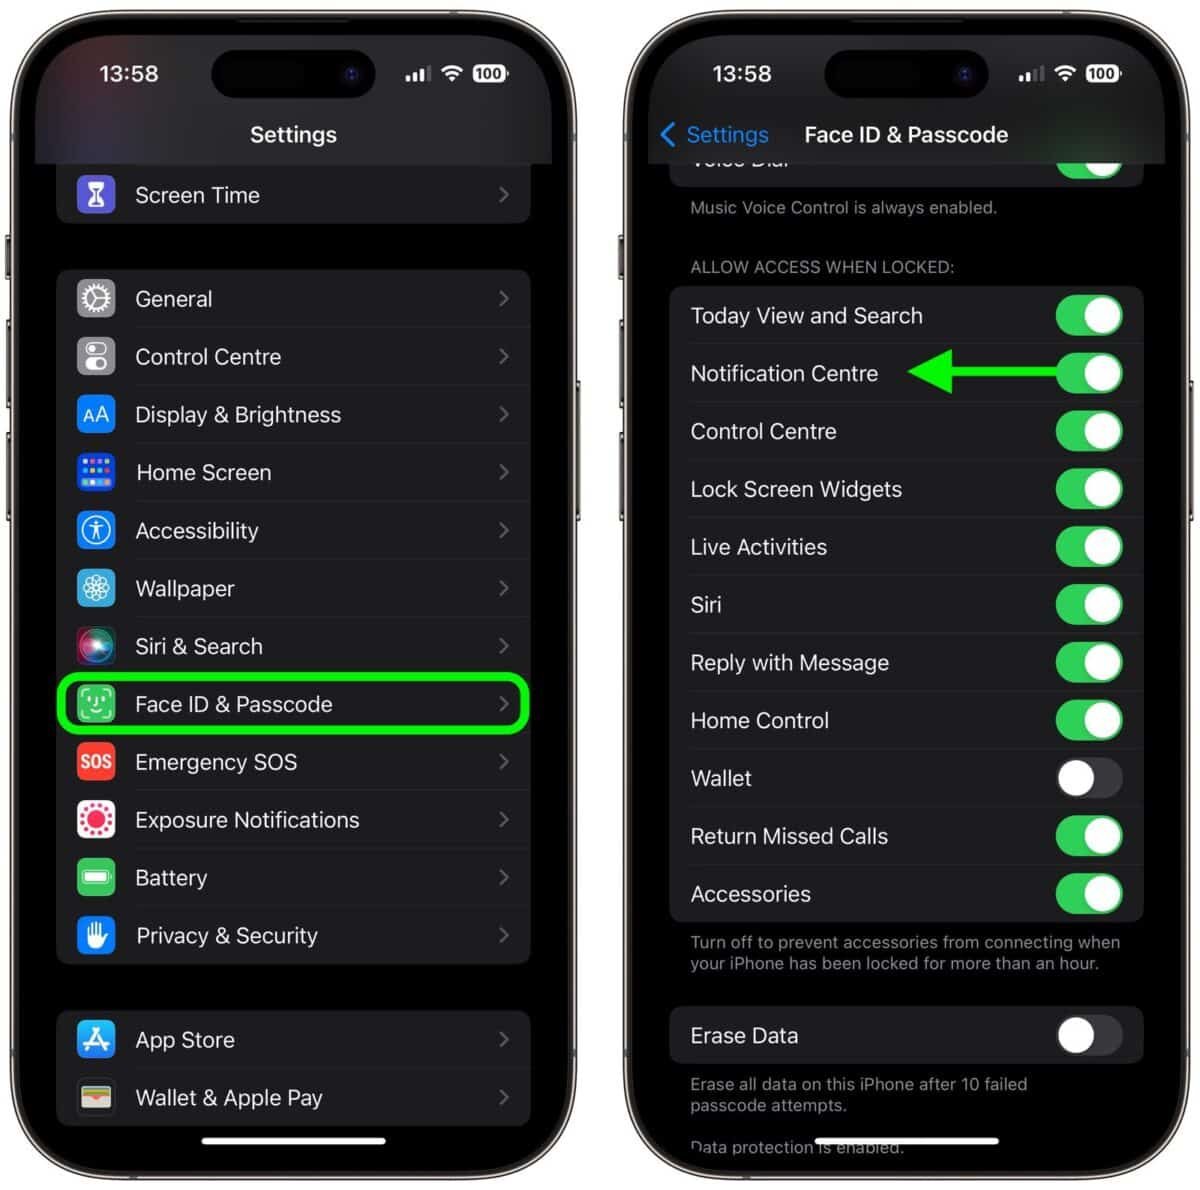 open notification center in face ID